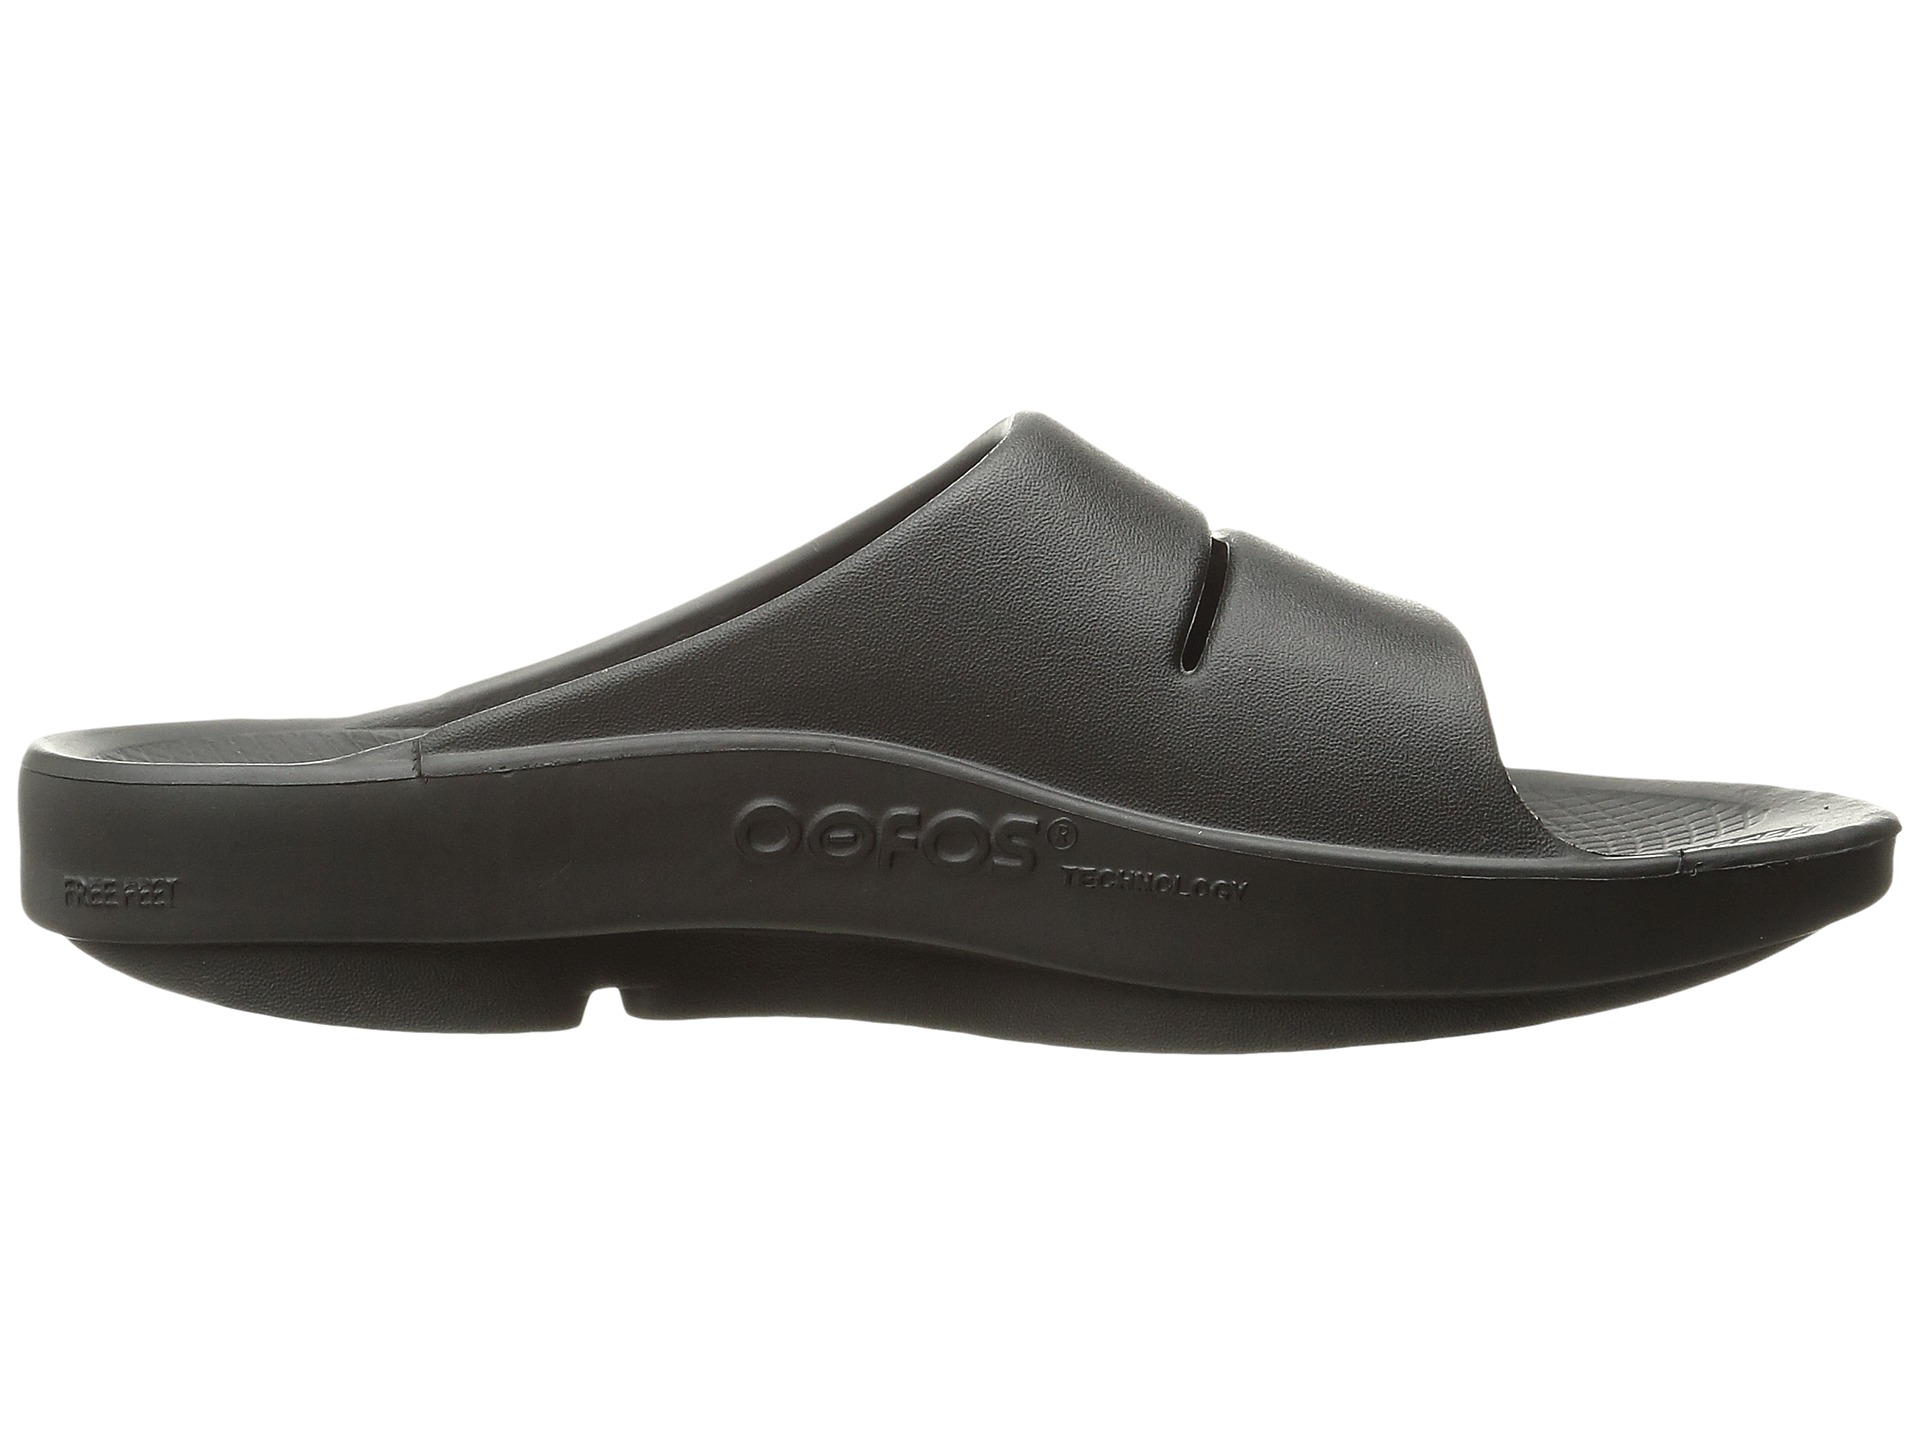 OOFOS OOahh Slide Sandal at Zappos.com